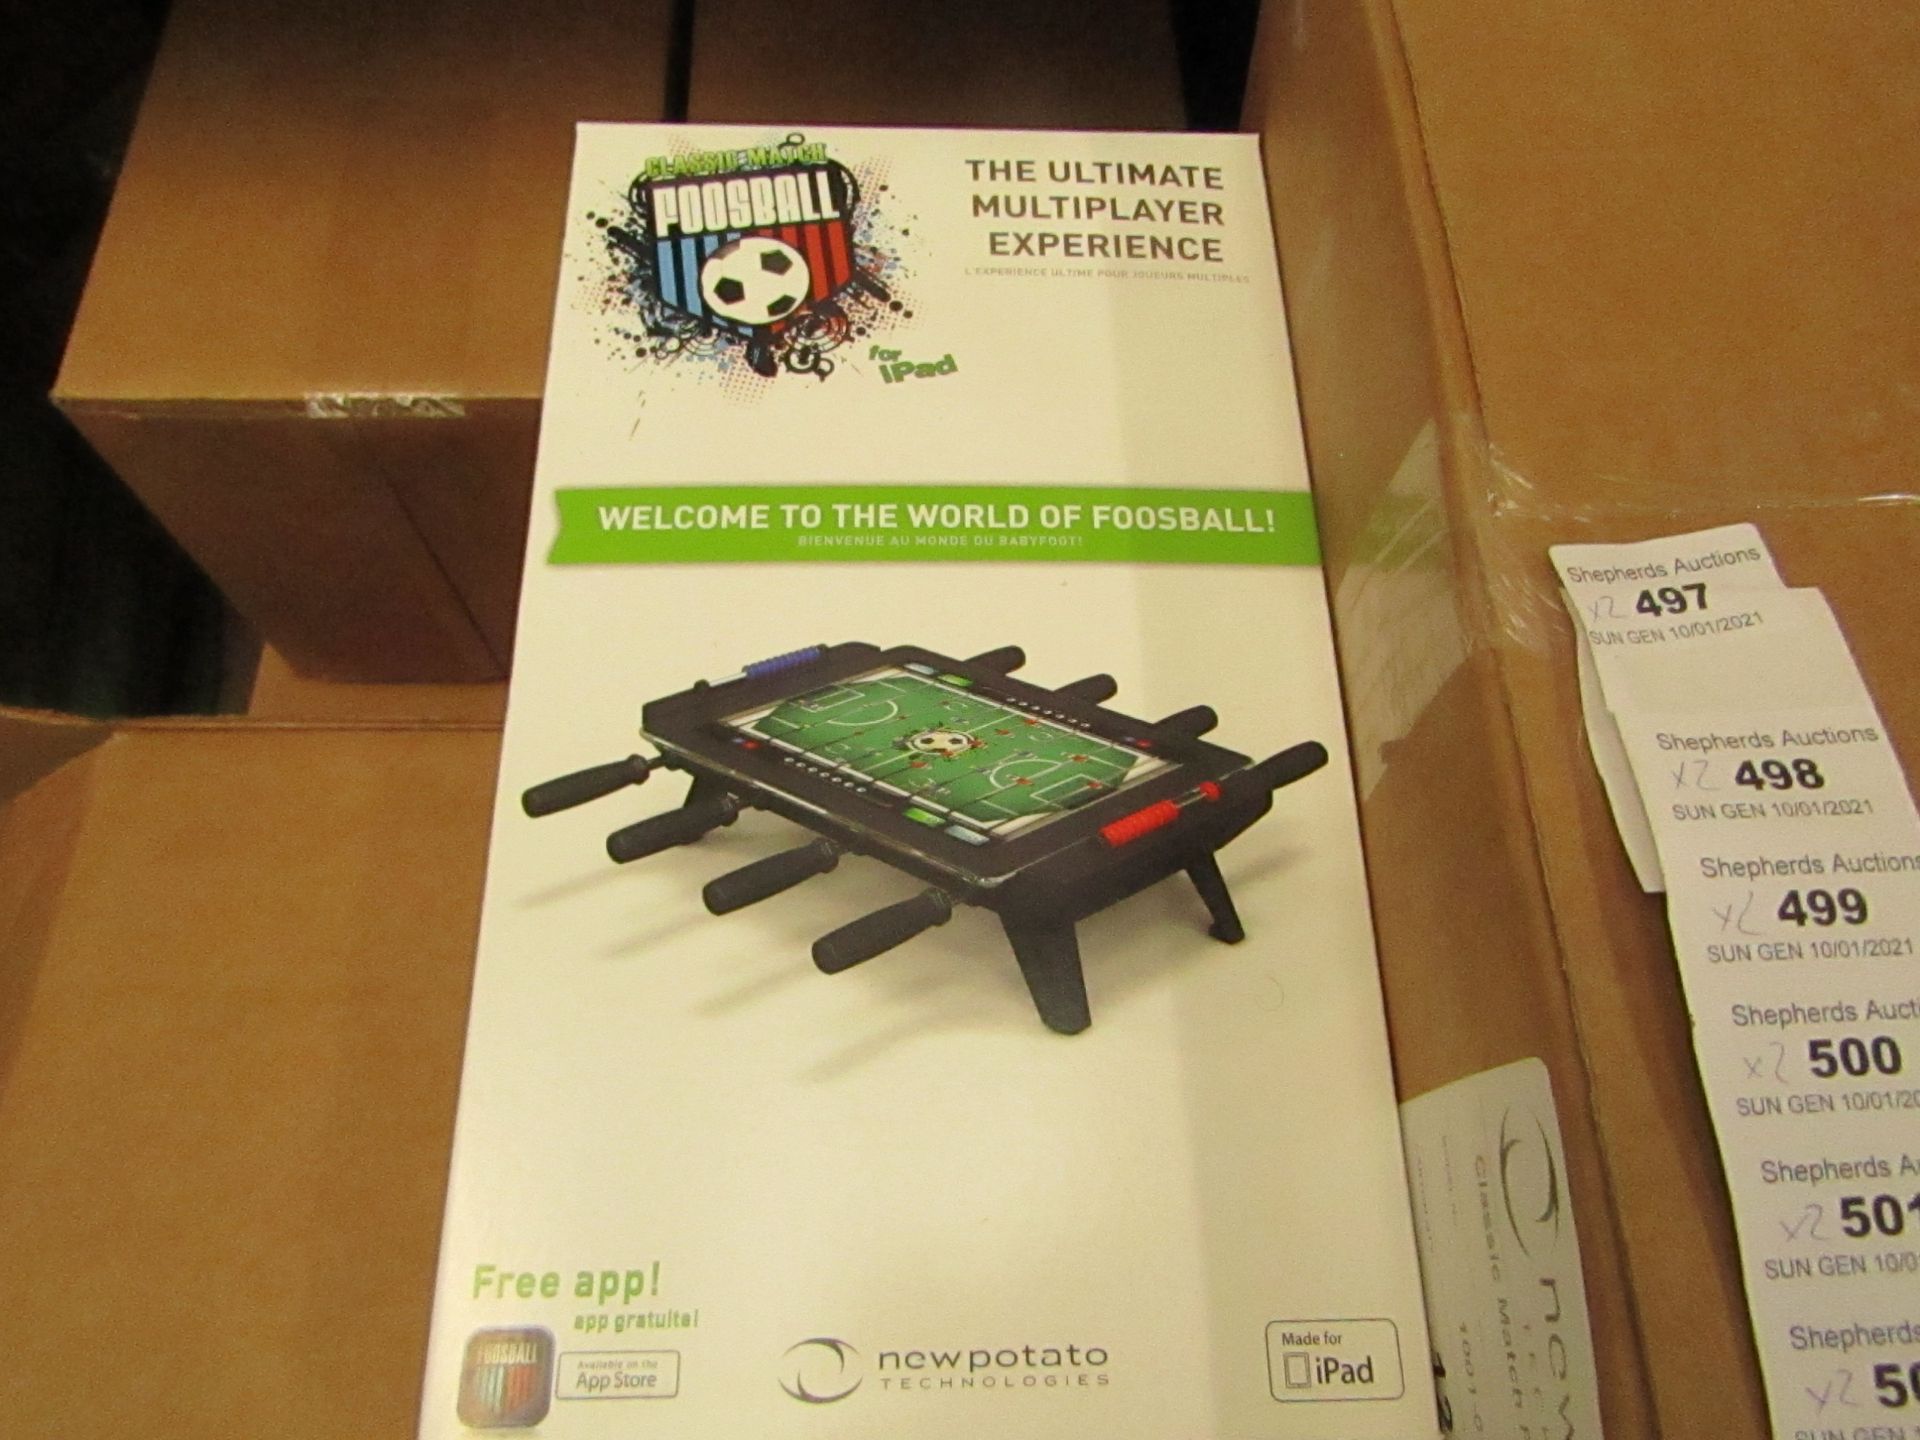 2x Classic Match Foosball iPad accessory,download the app - insert your ipad and paly foosball -